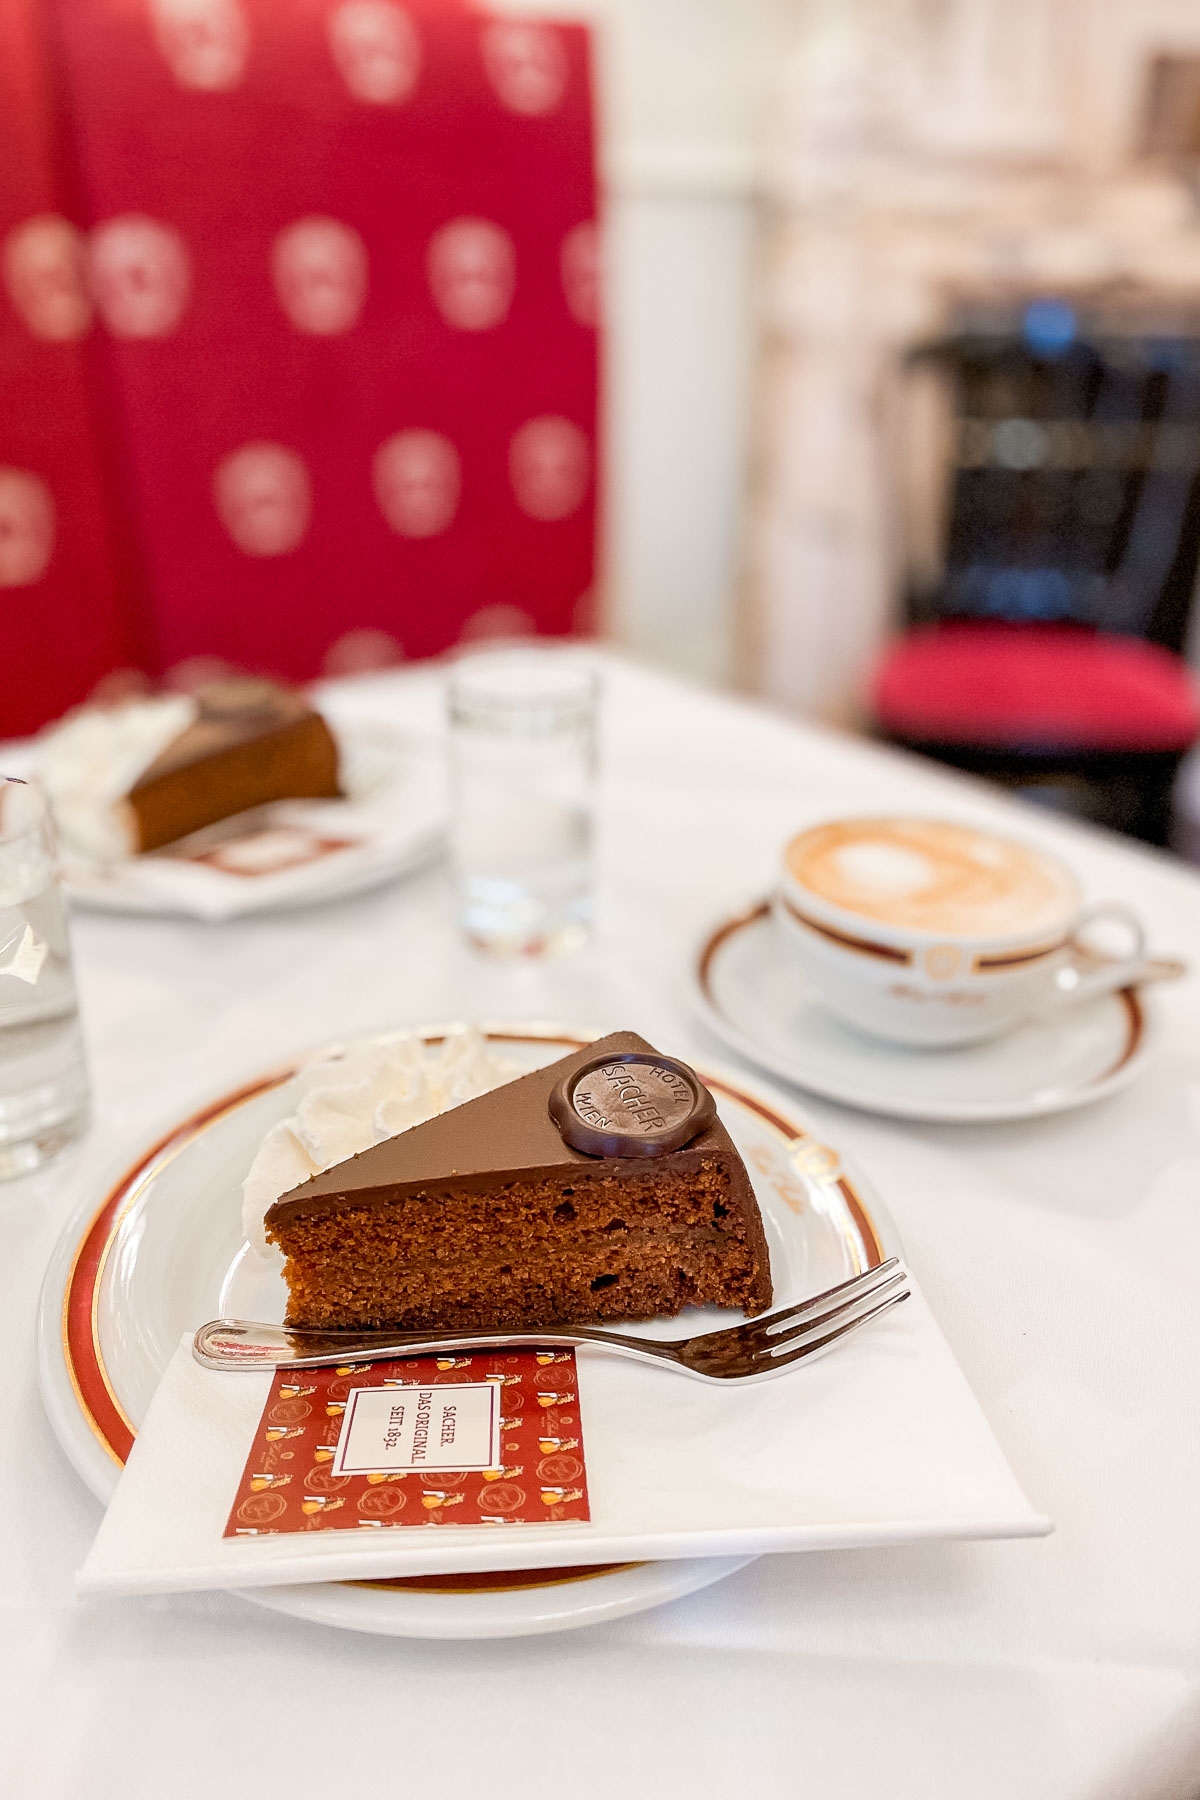 The famous Sacher Cake at Cafe Sacher, Vienna